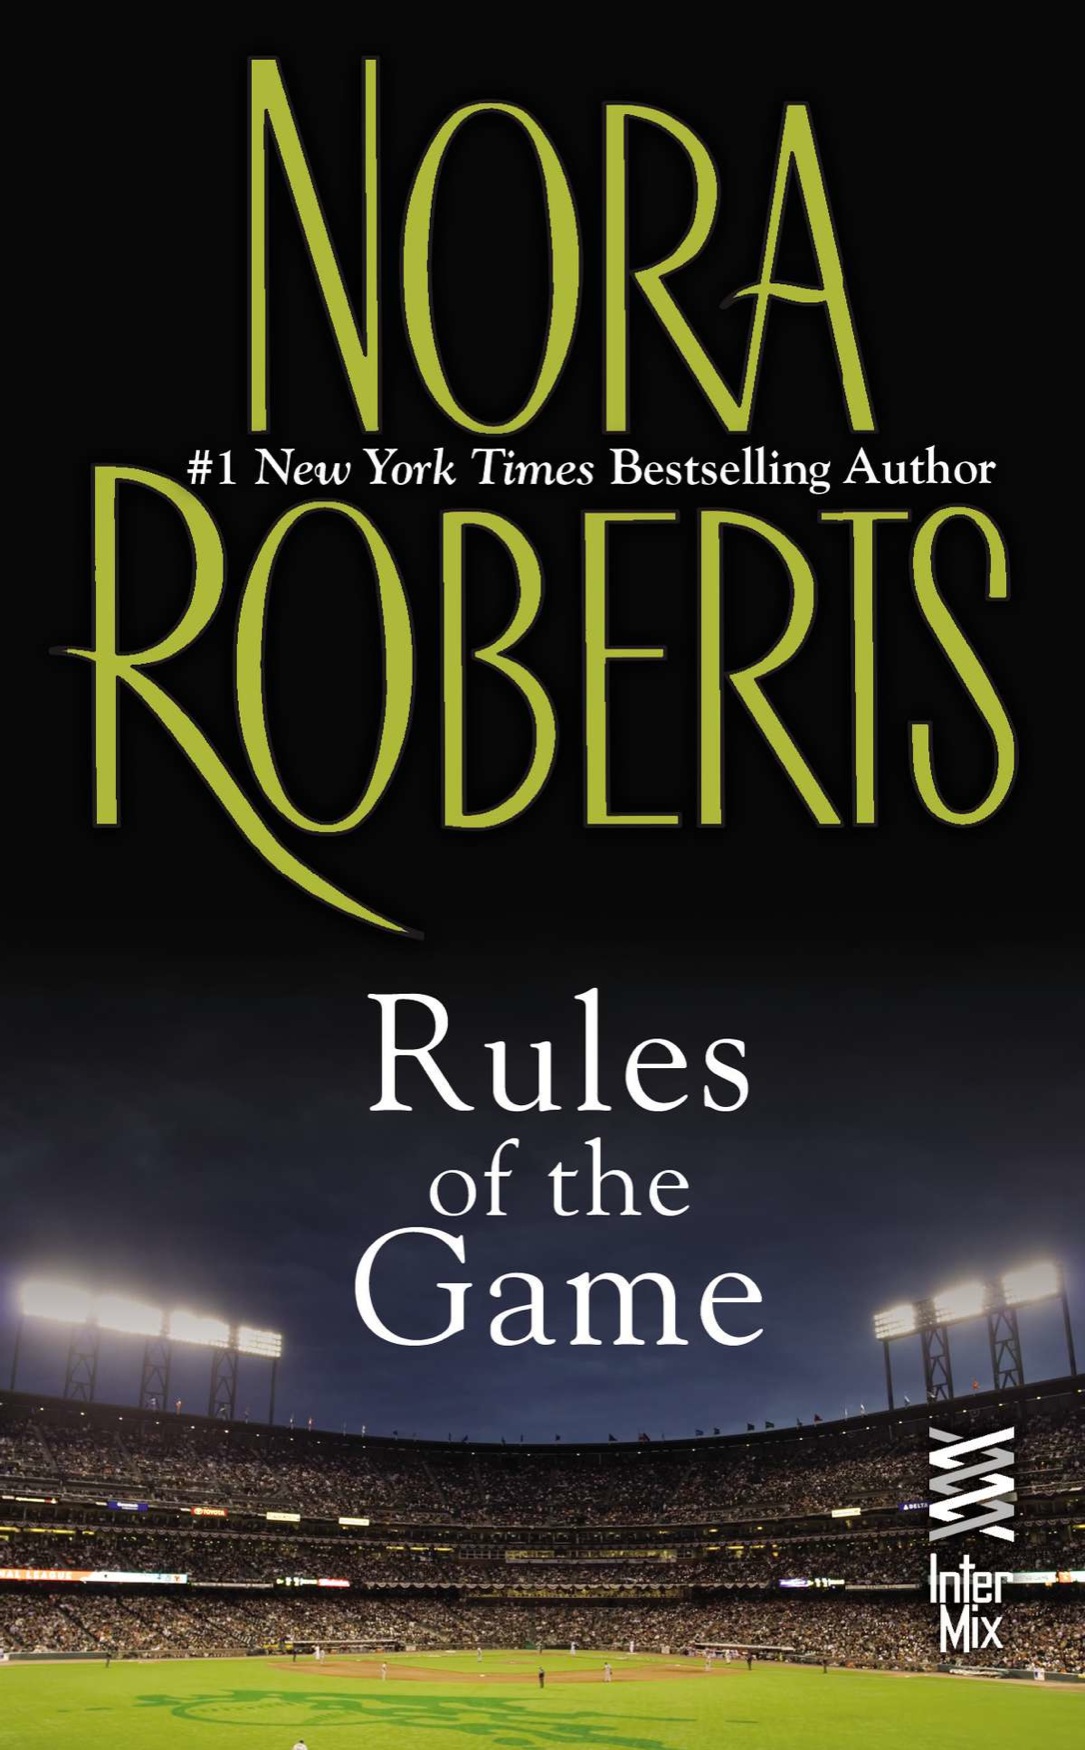 Rules of the Game (2012) by Nora Roberts